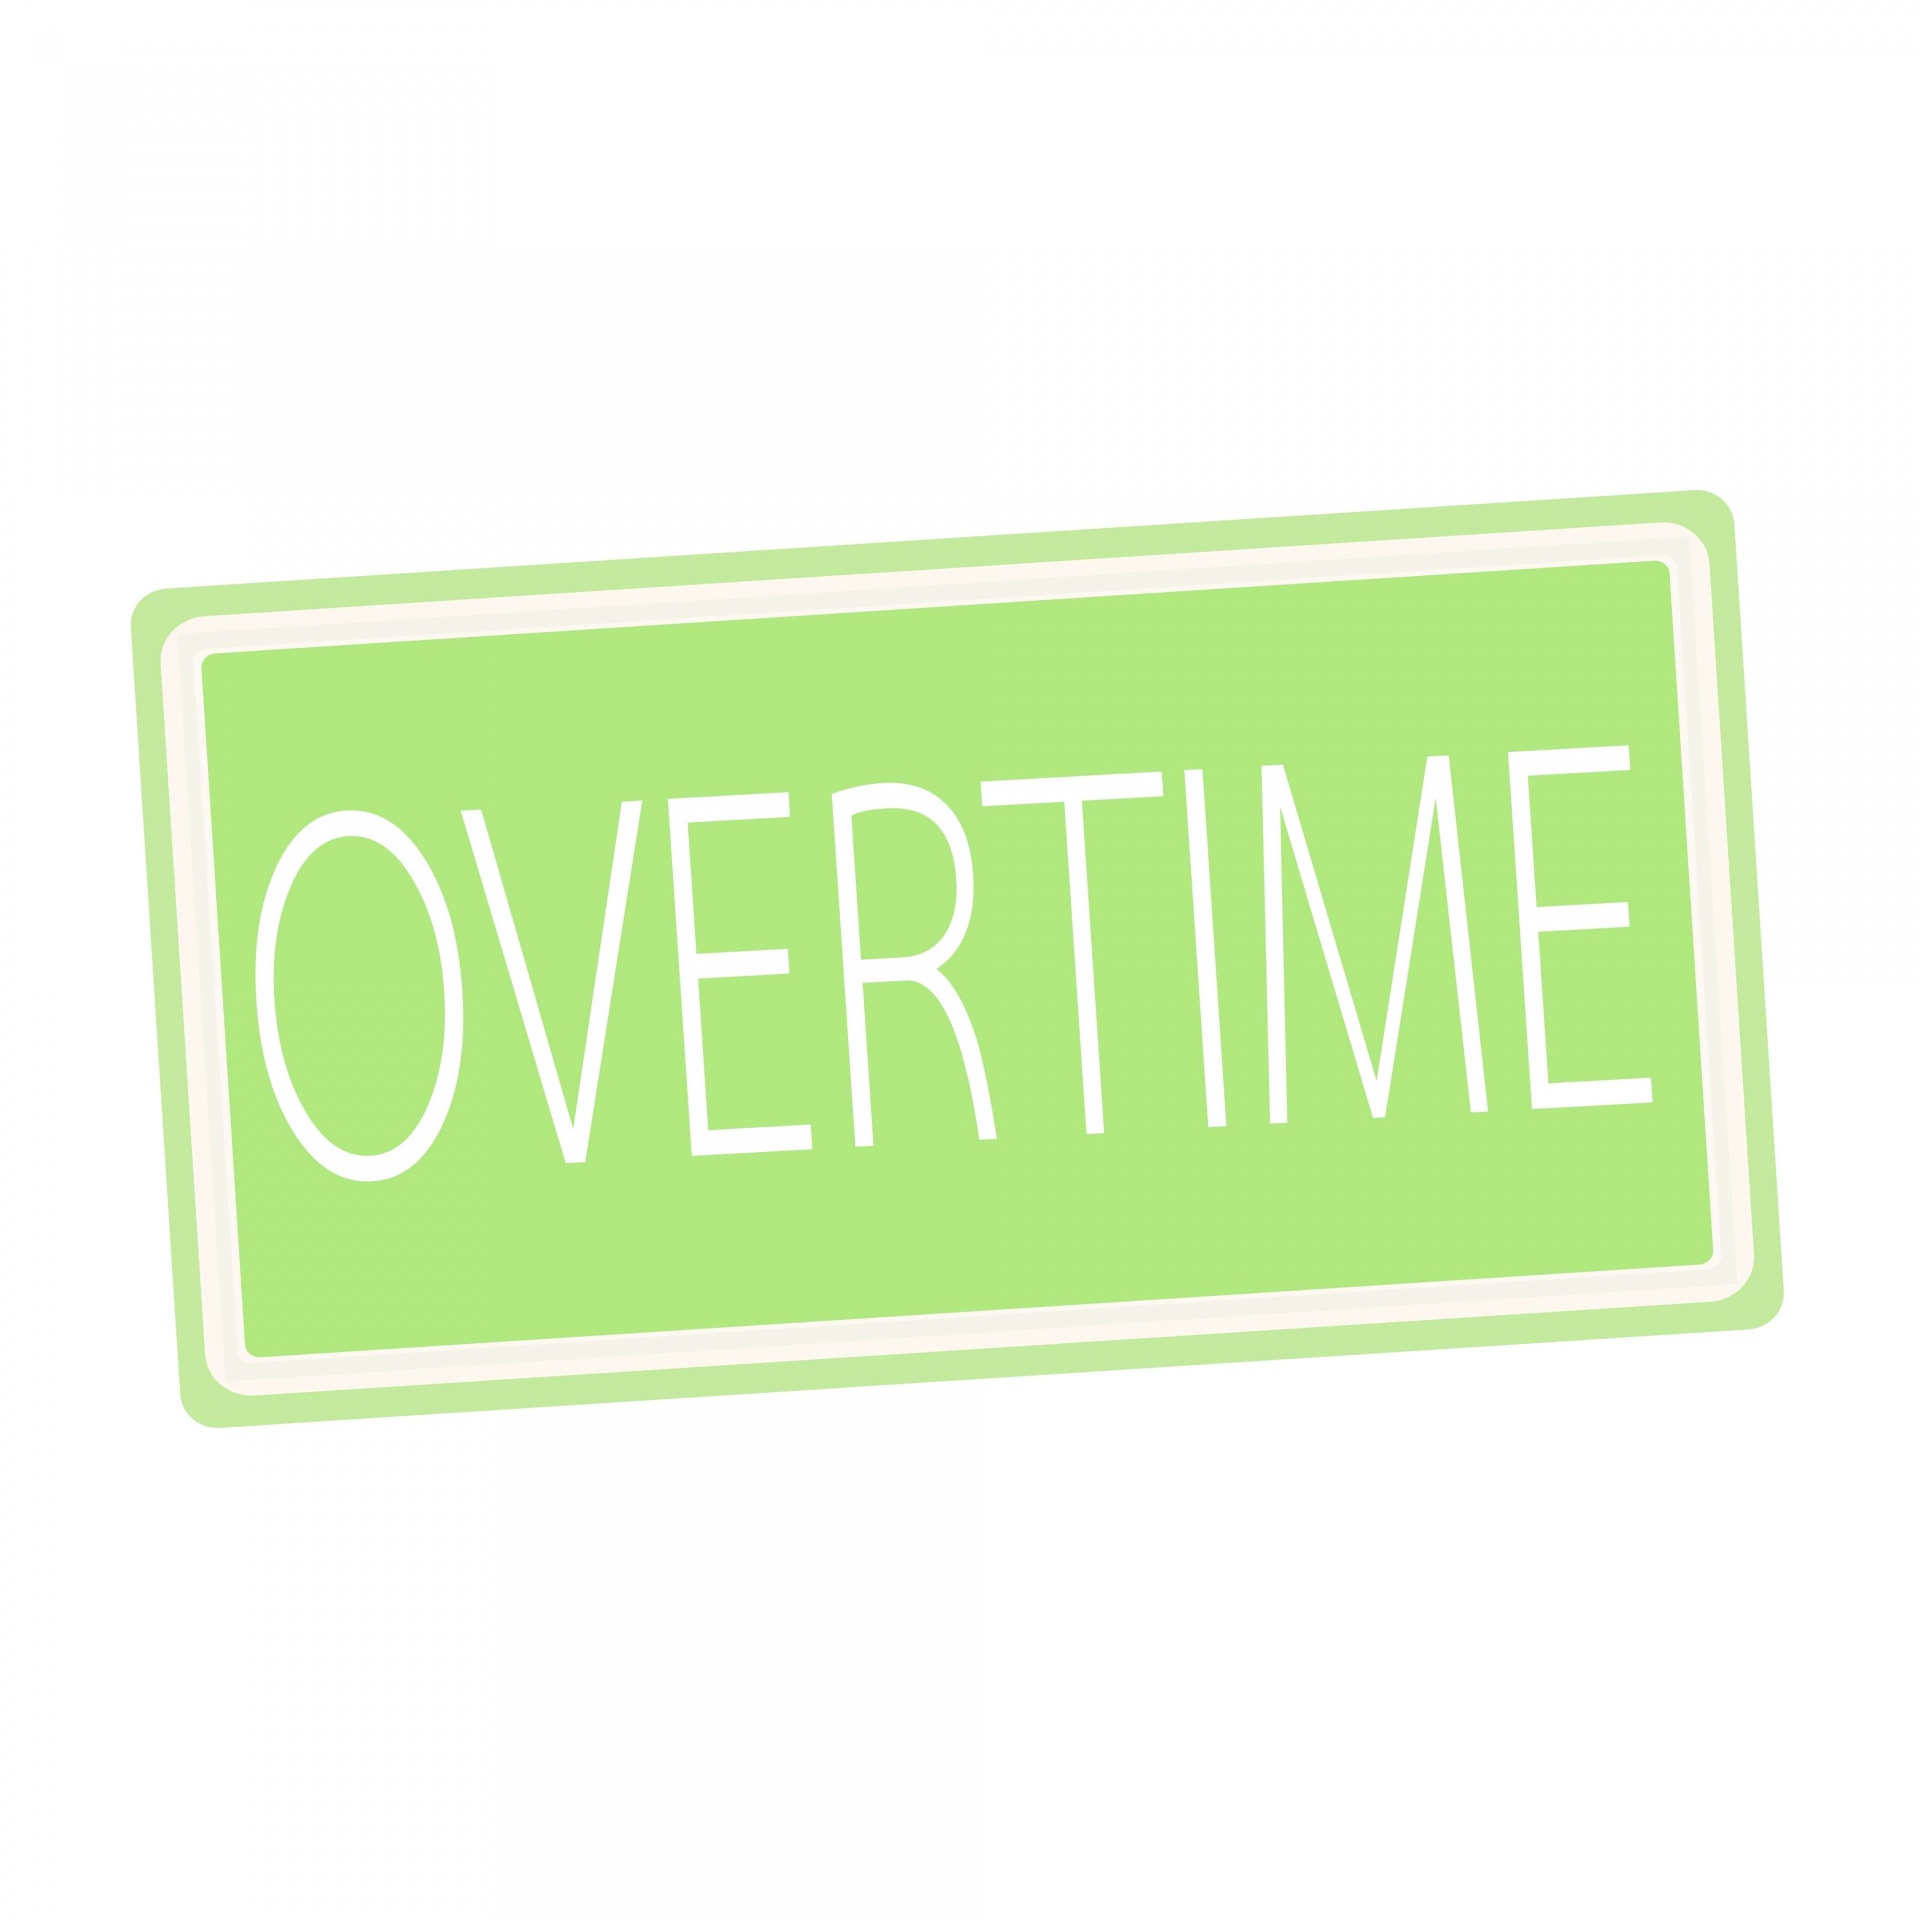 Overtime White Stamp Text On Green